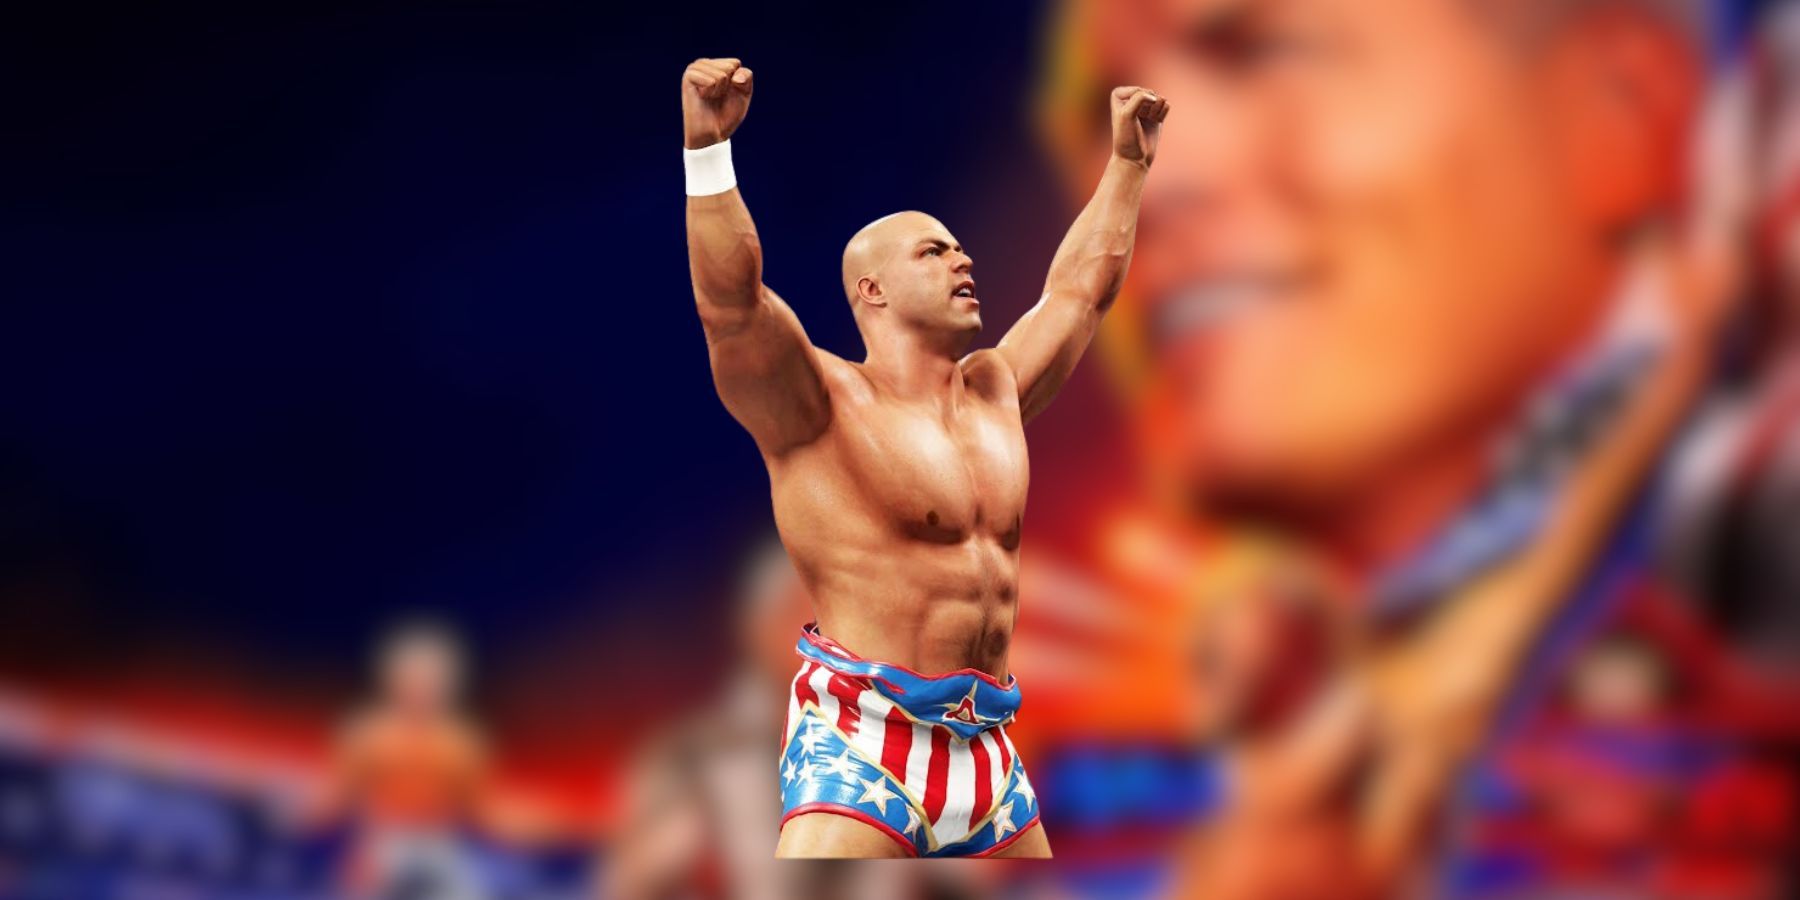 Kurt Angle without Straps in WWE 2K